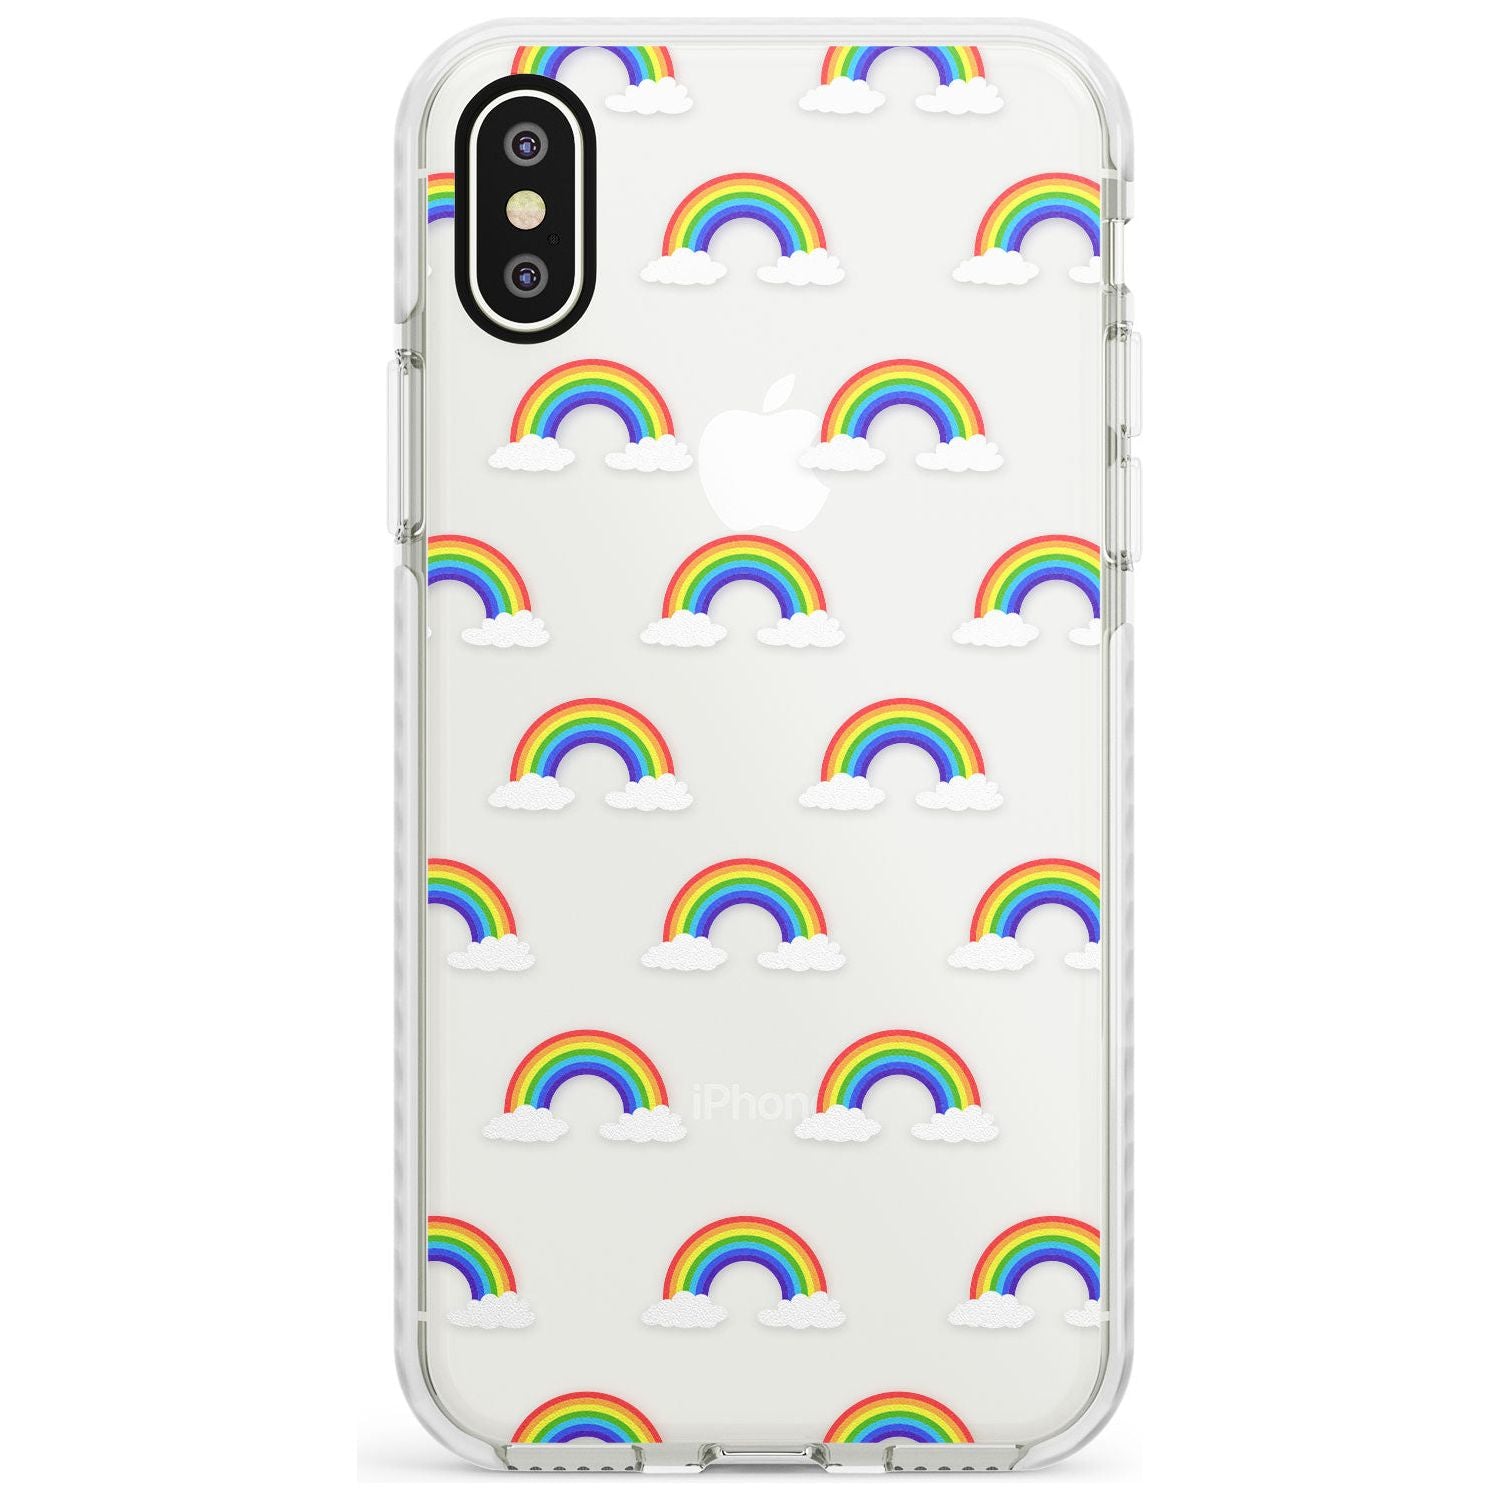 Rainbow of possibilities Impact Phone Case for iPhone X XS Max XR